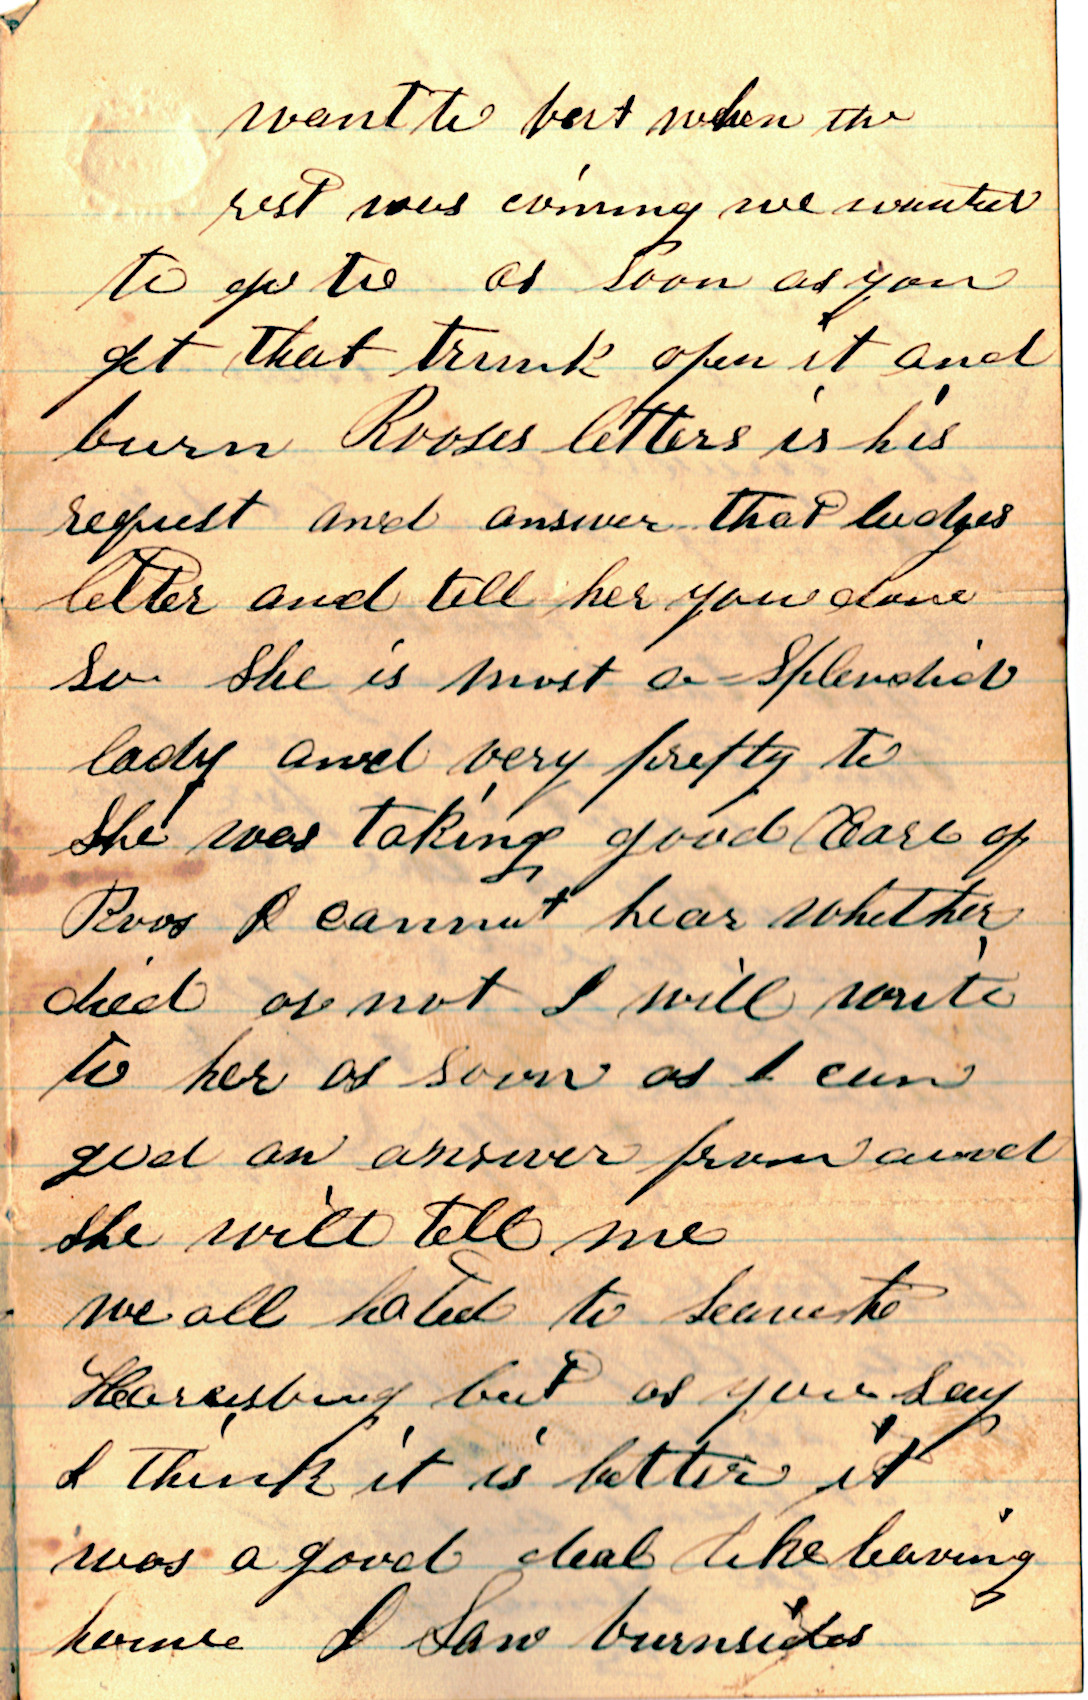 Letter of 27 April 1864, Page 3.